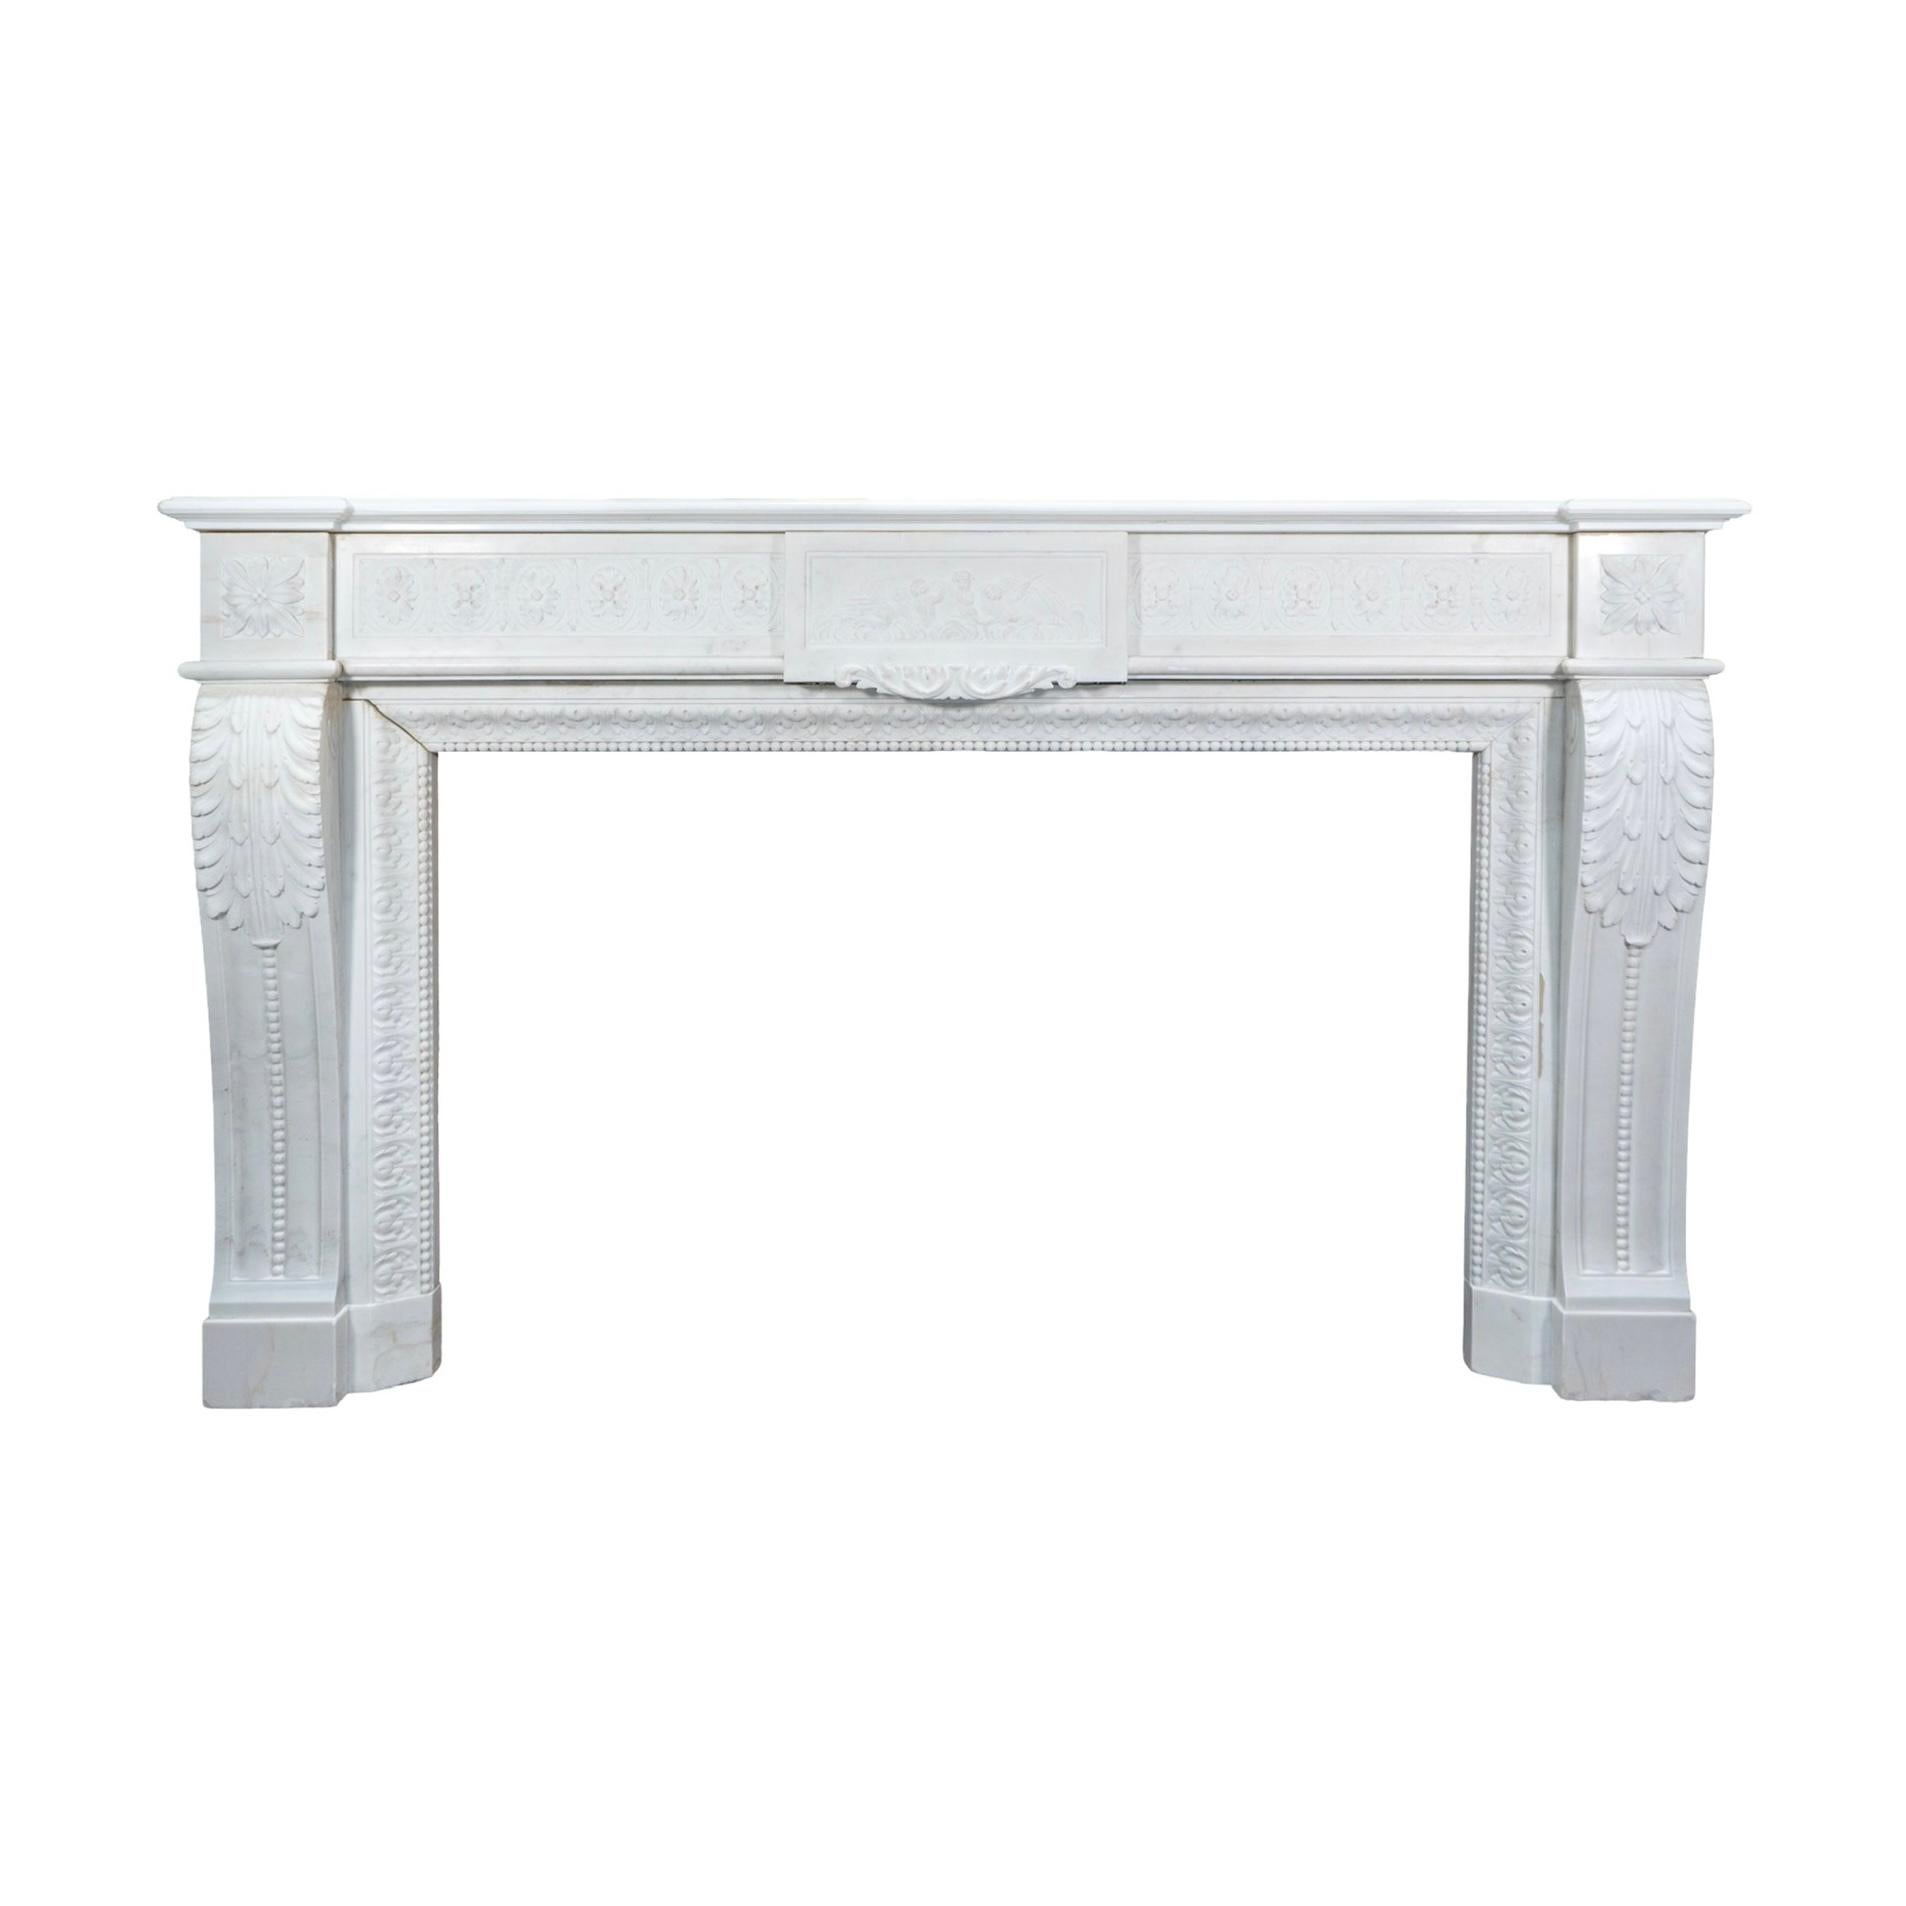 This French White Veined Carrara Marble Mantel is a stunning display of Louis XVI style, with intricate carvings throughout. Imported from France in the 1850s, this mantel is made of high-quality white veined Carrara marble. Aesthetically pleasing